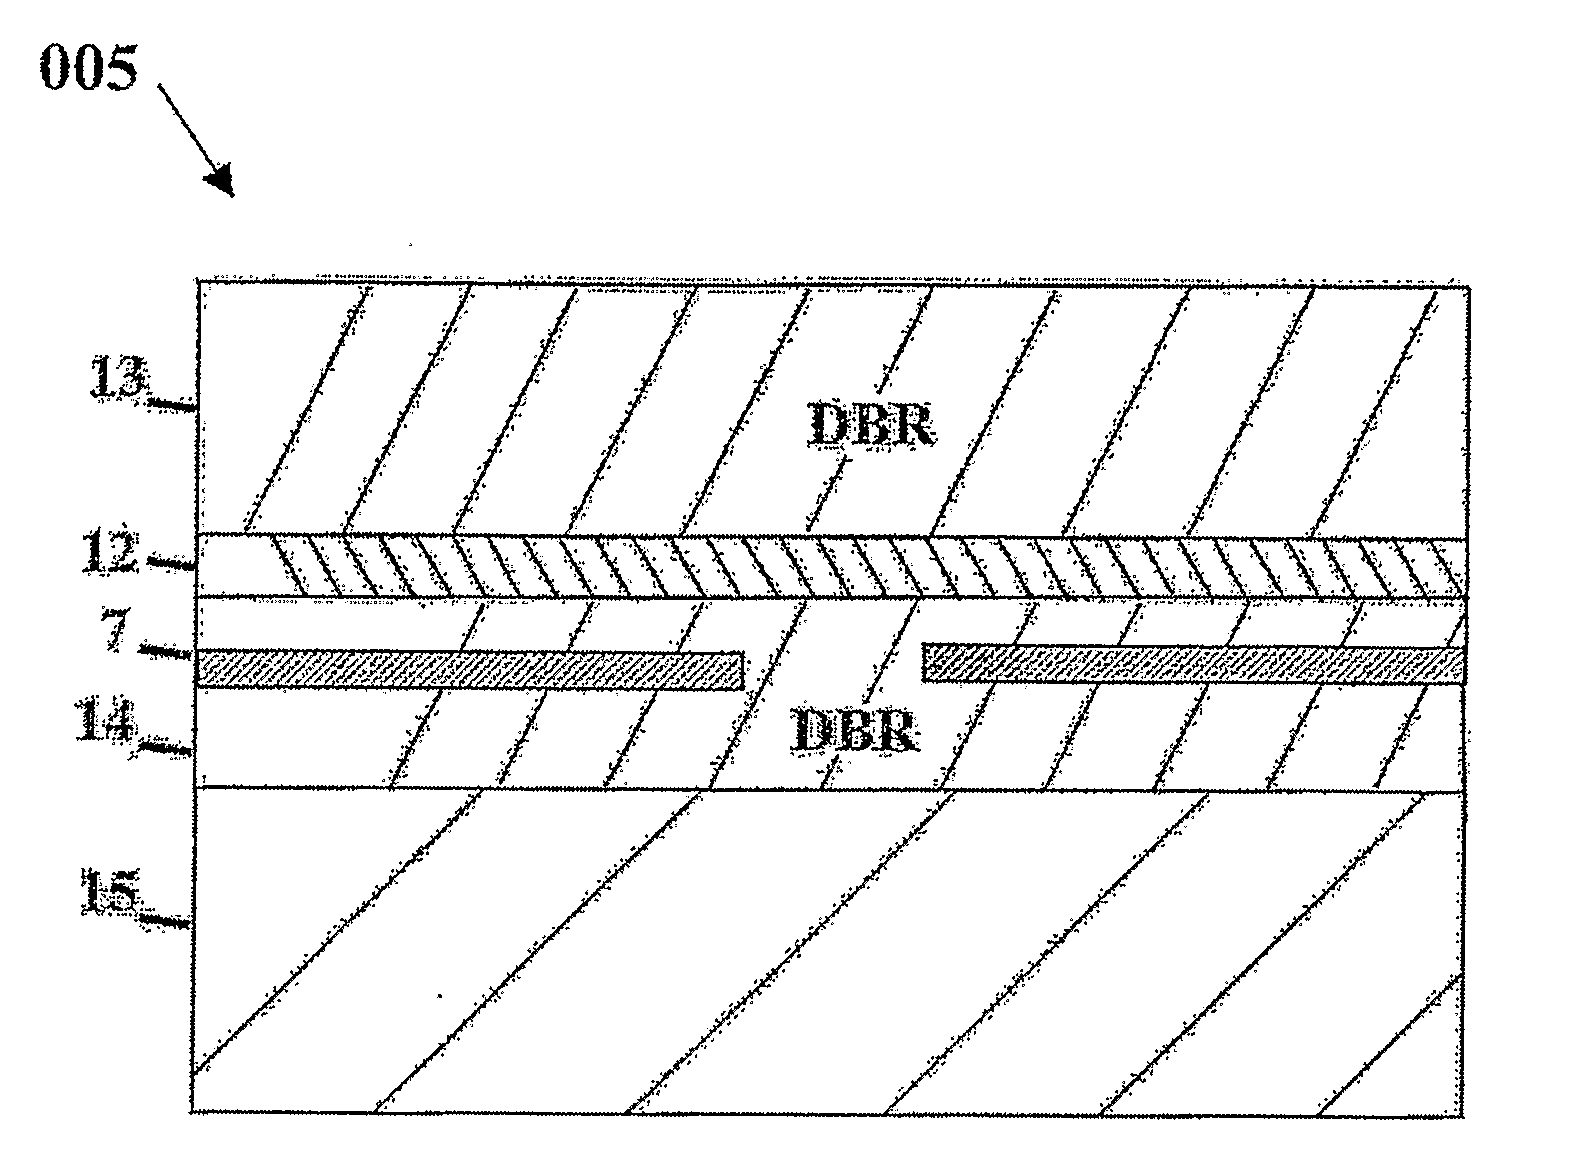 Semiconductor layer structure